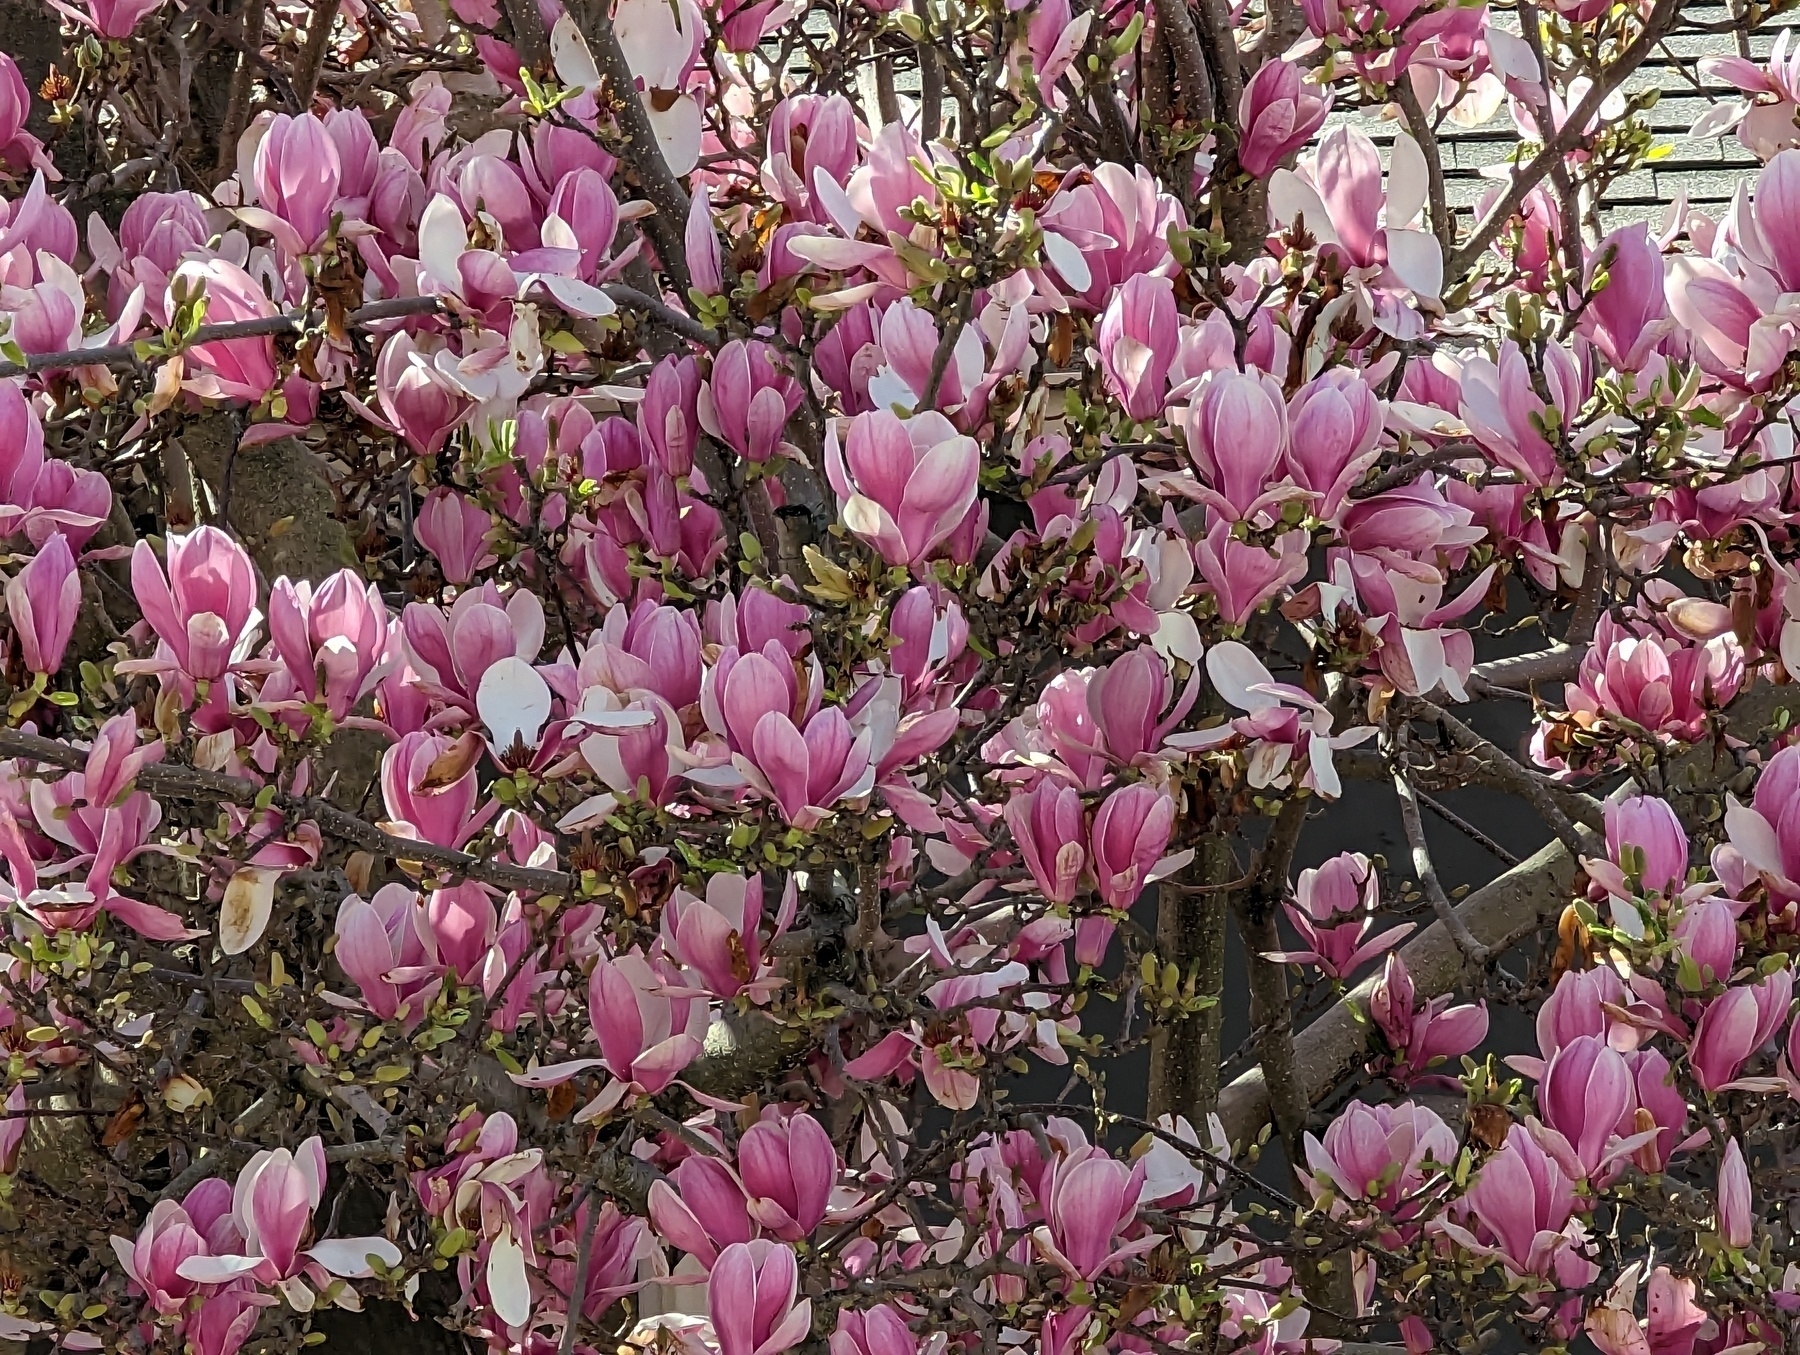 Pink and white flower blossoms run riot along tree branches in the front yard of a house Sunday, March 5, 2023 in the Upper Laurel neighborhood of Oakland, California.